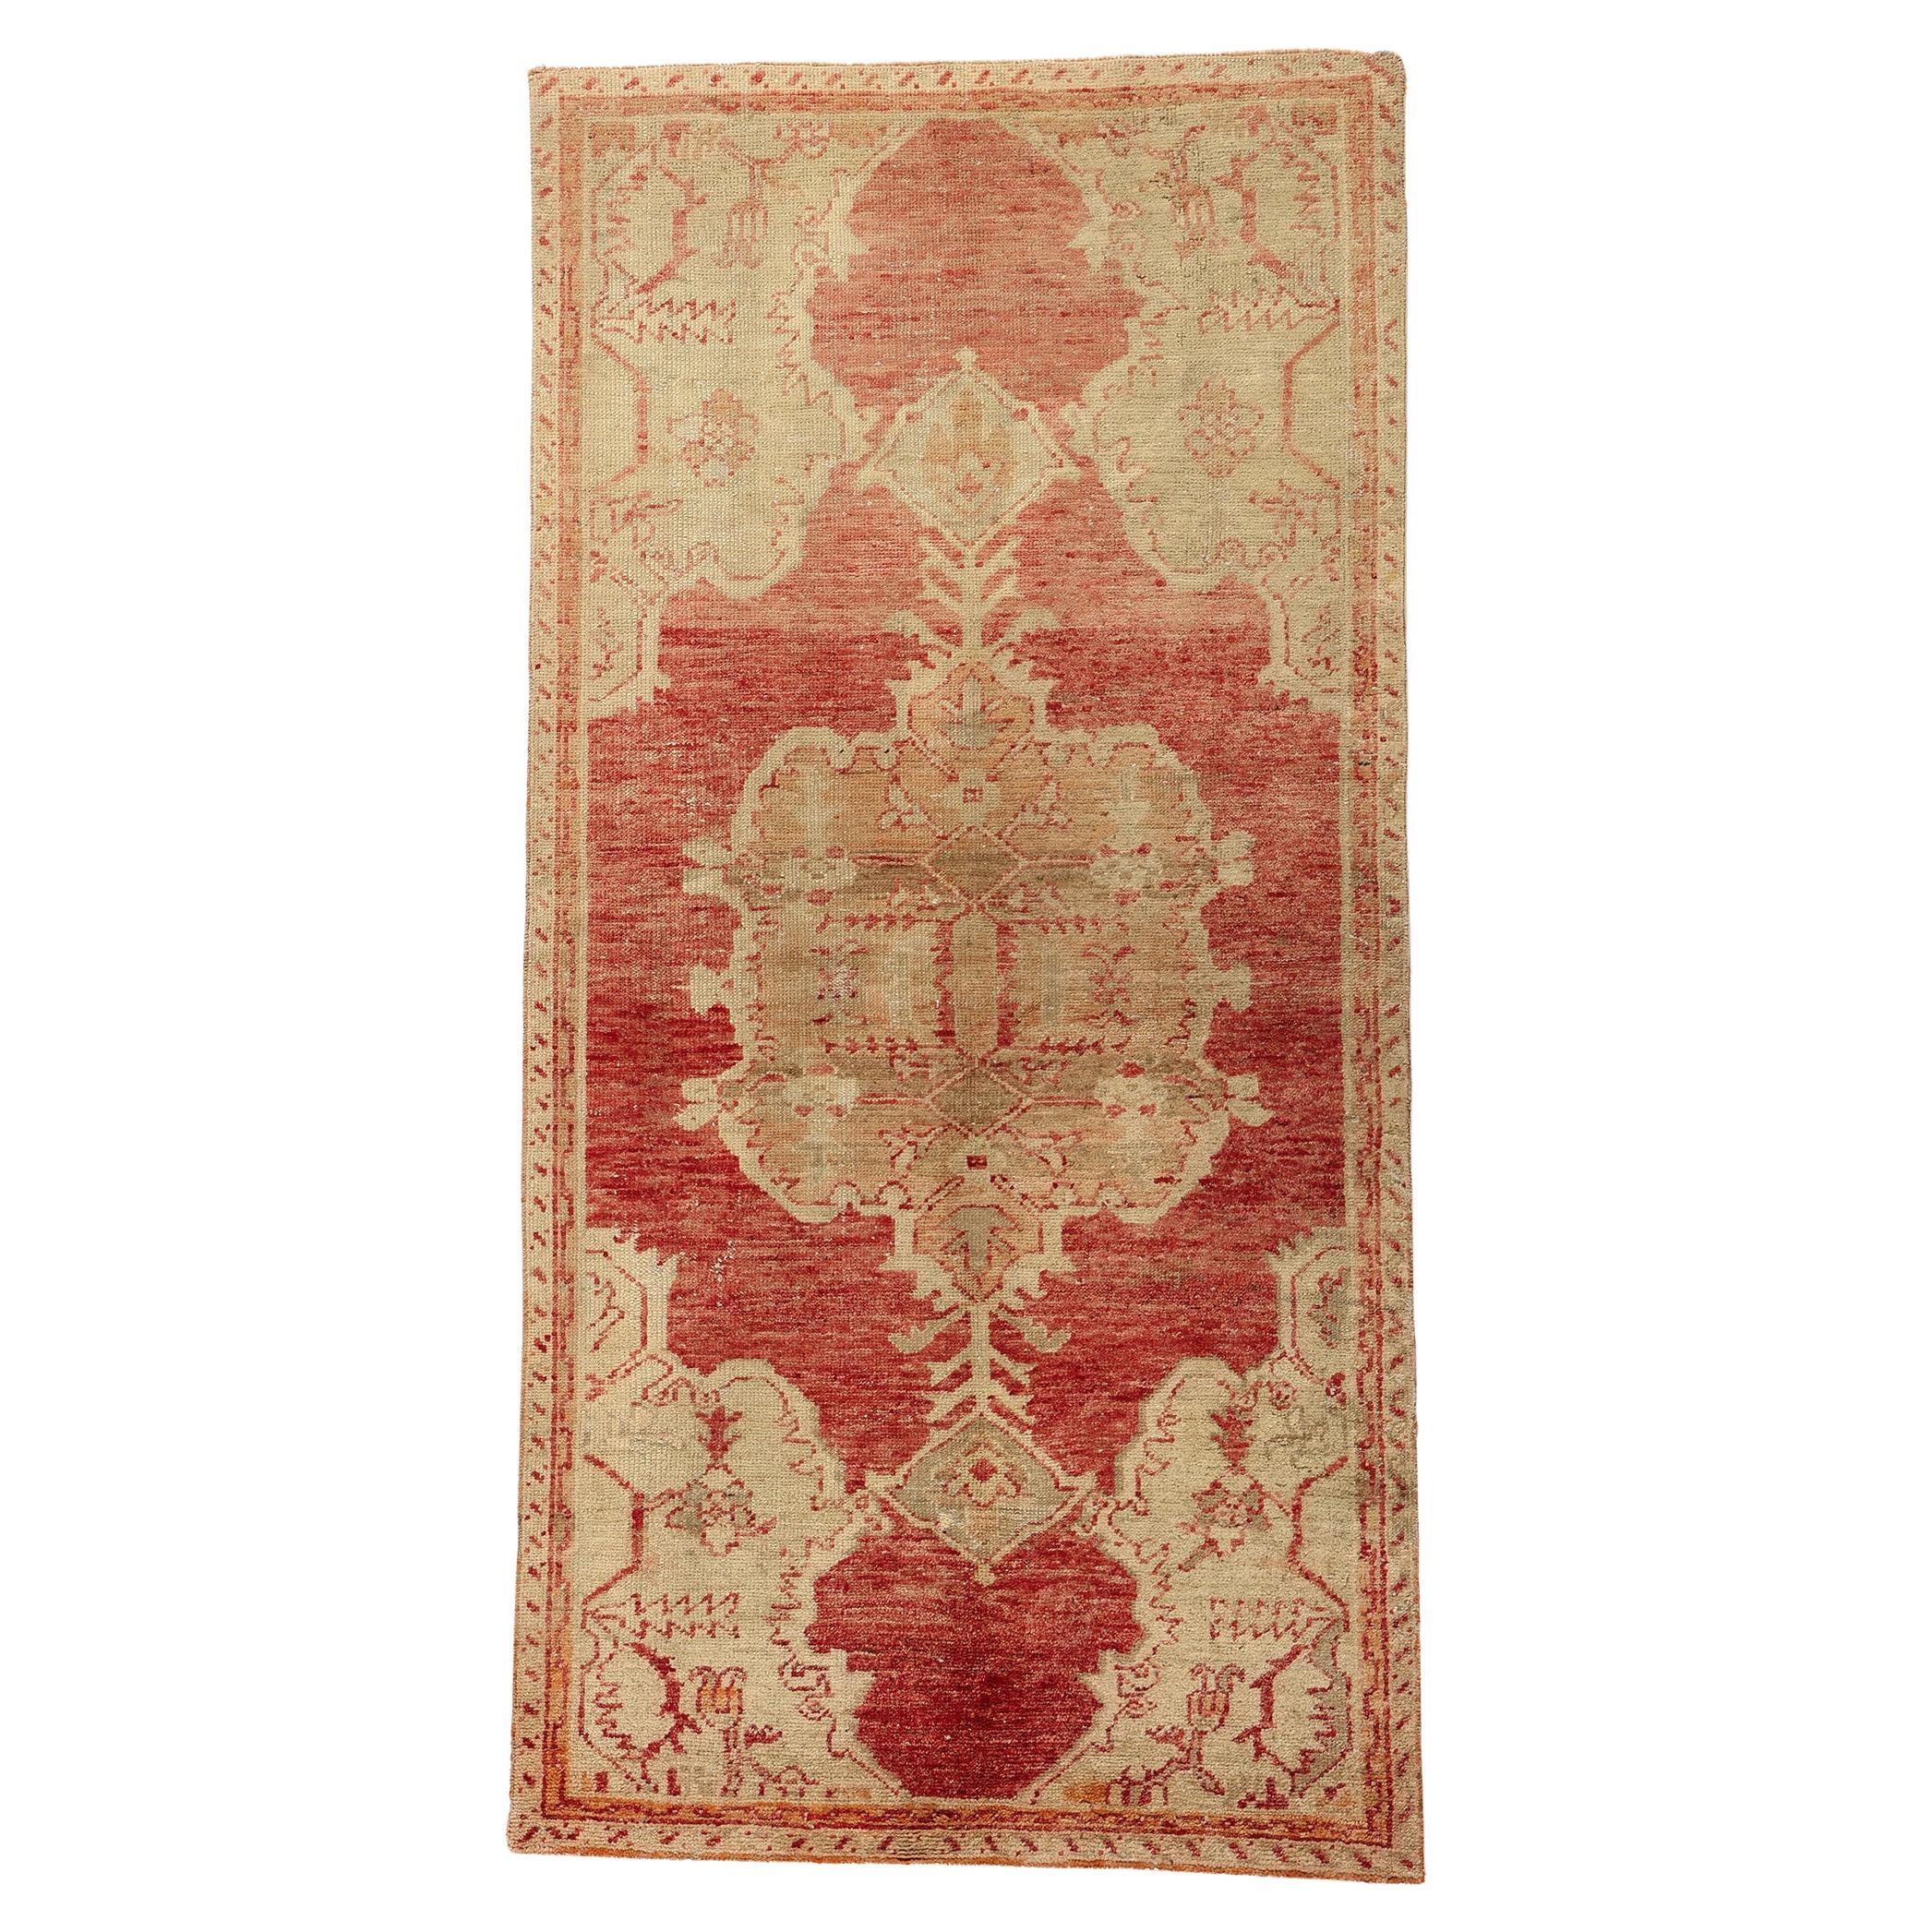 Vintage Turkish Oushak Rug with Rustic Earth-Tone Colors For Sale